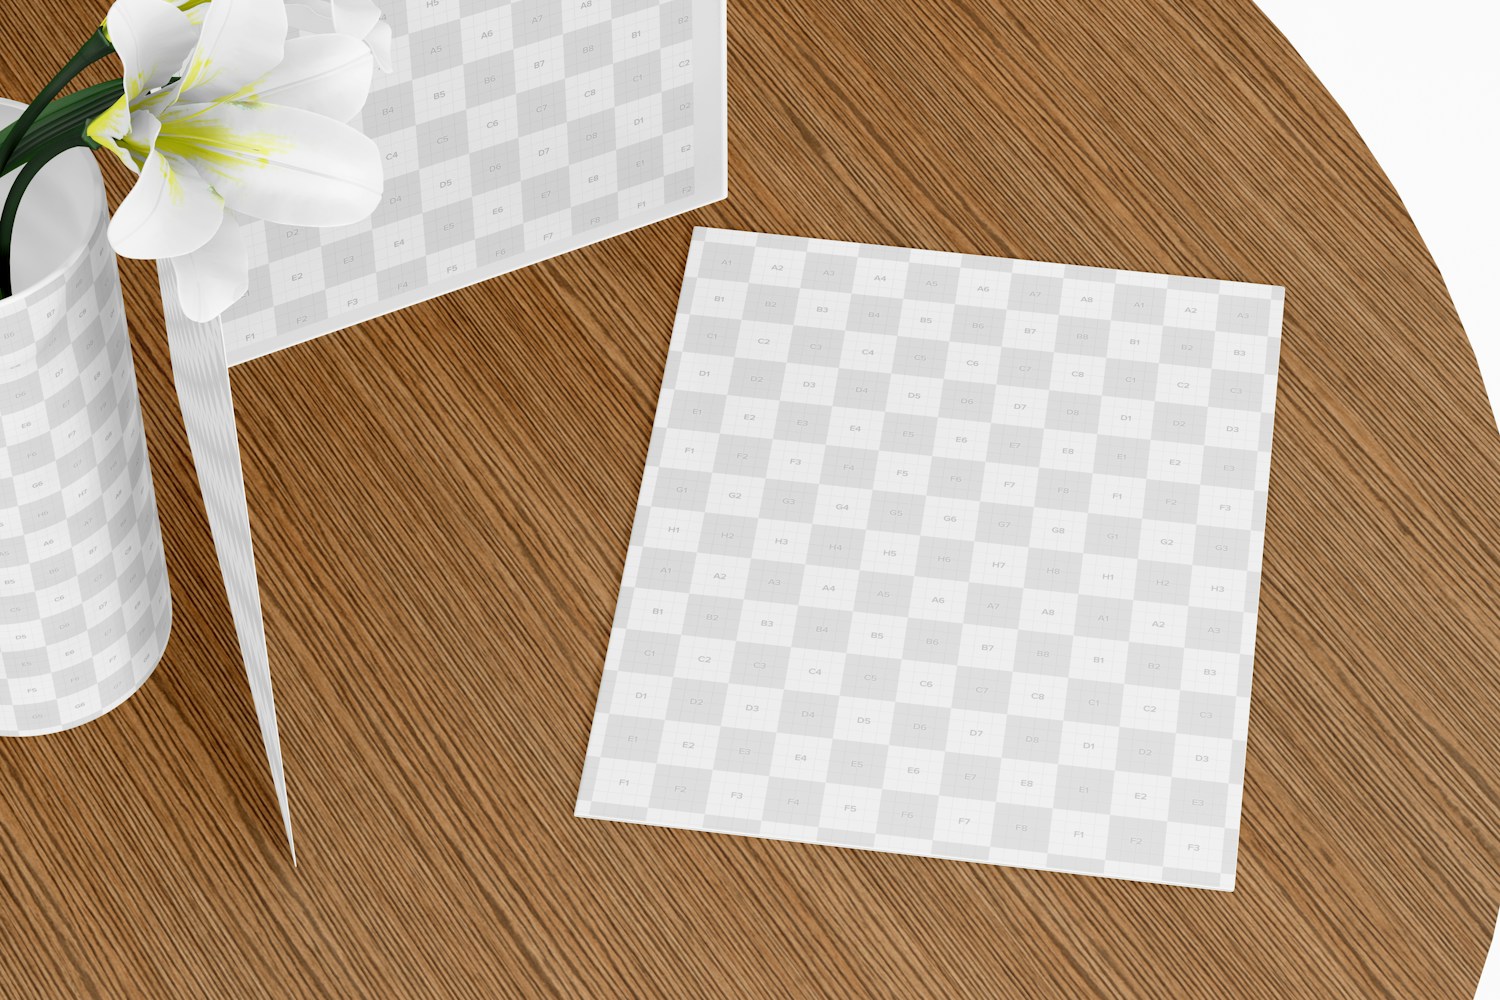 Two-sided Menu Covers Mockup, Perspective